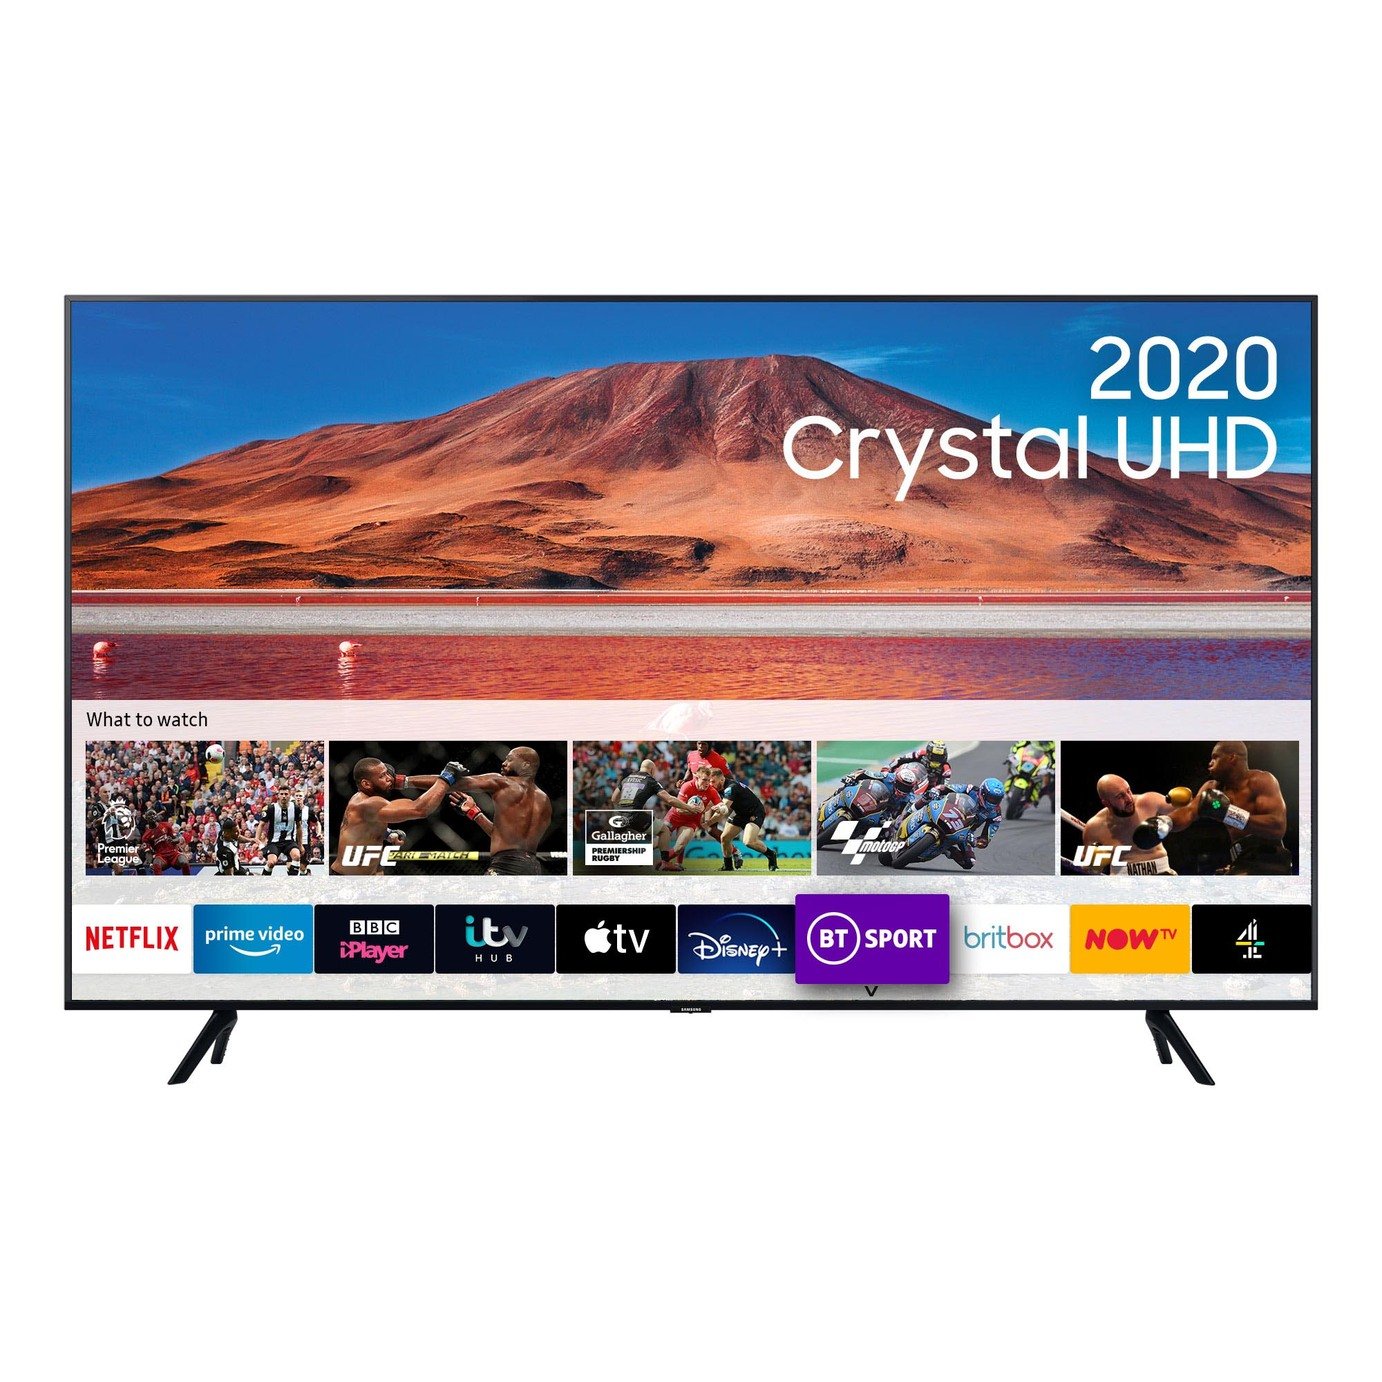 Samsung 65 Inch UE65TU7000KXXU Smart 4K Ultra HD TV with HDR Review